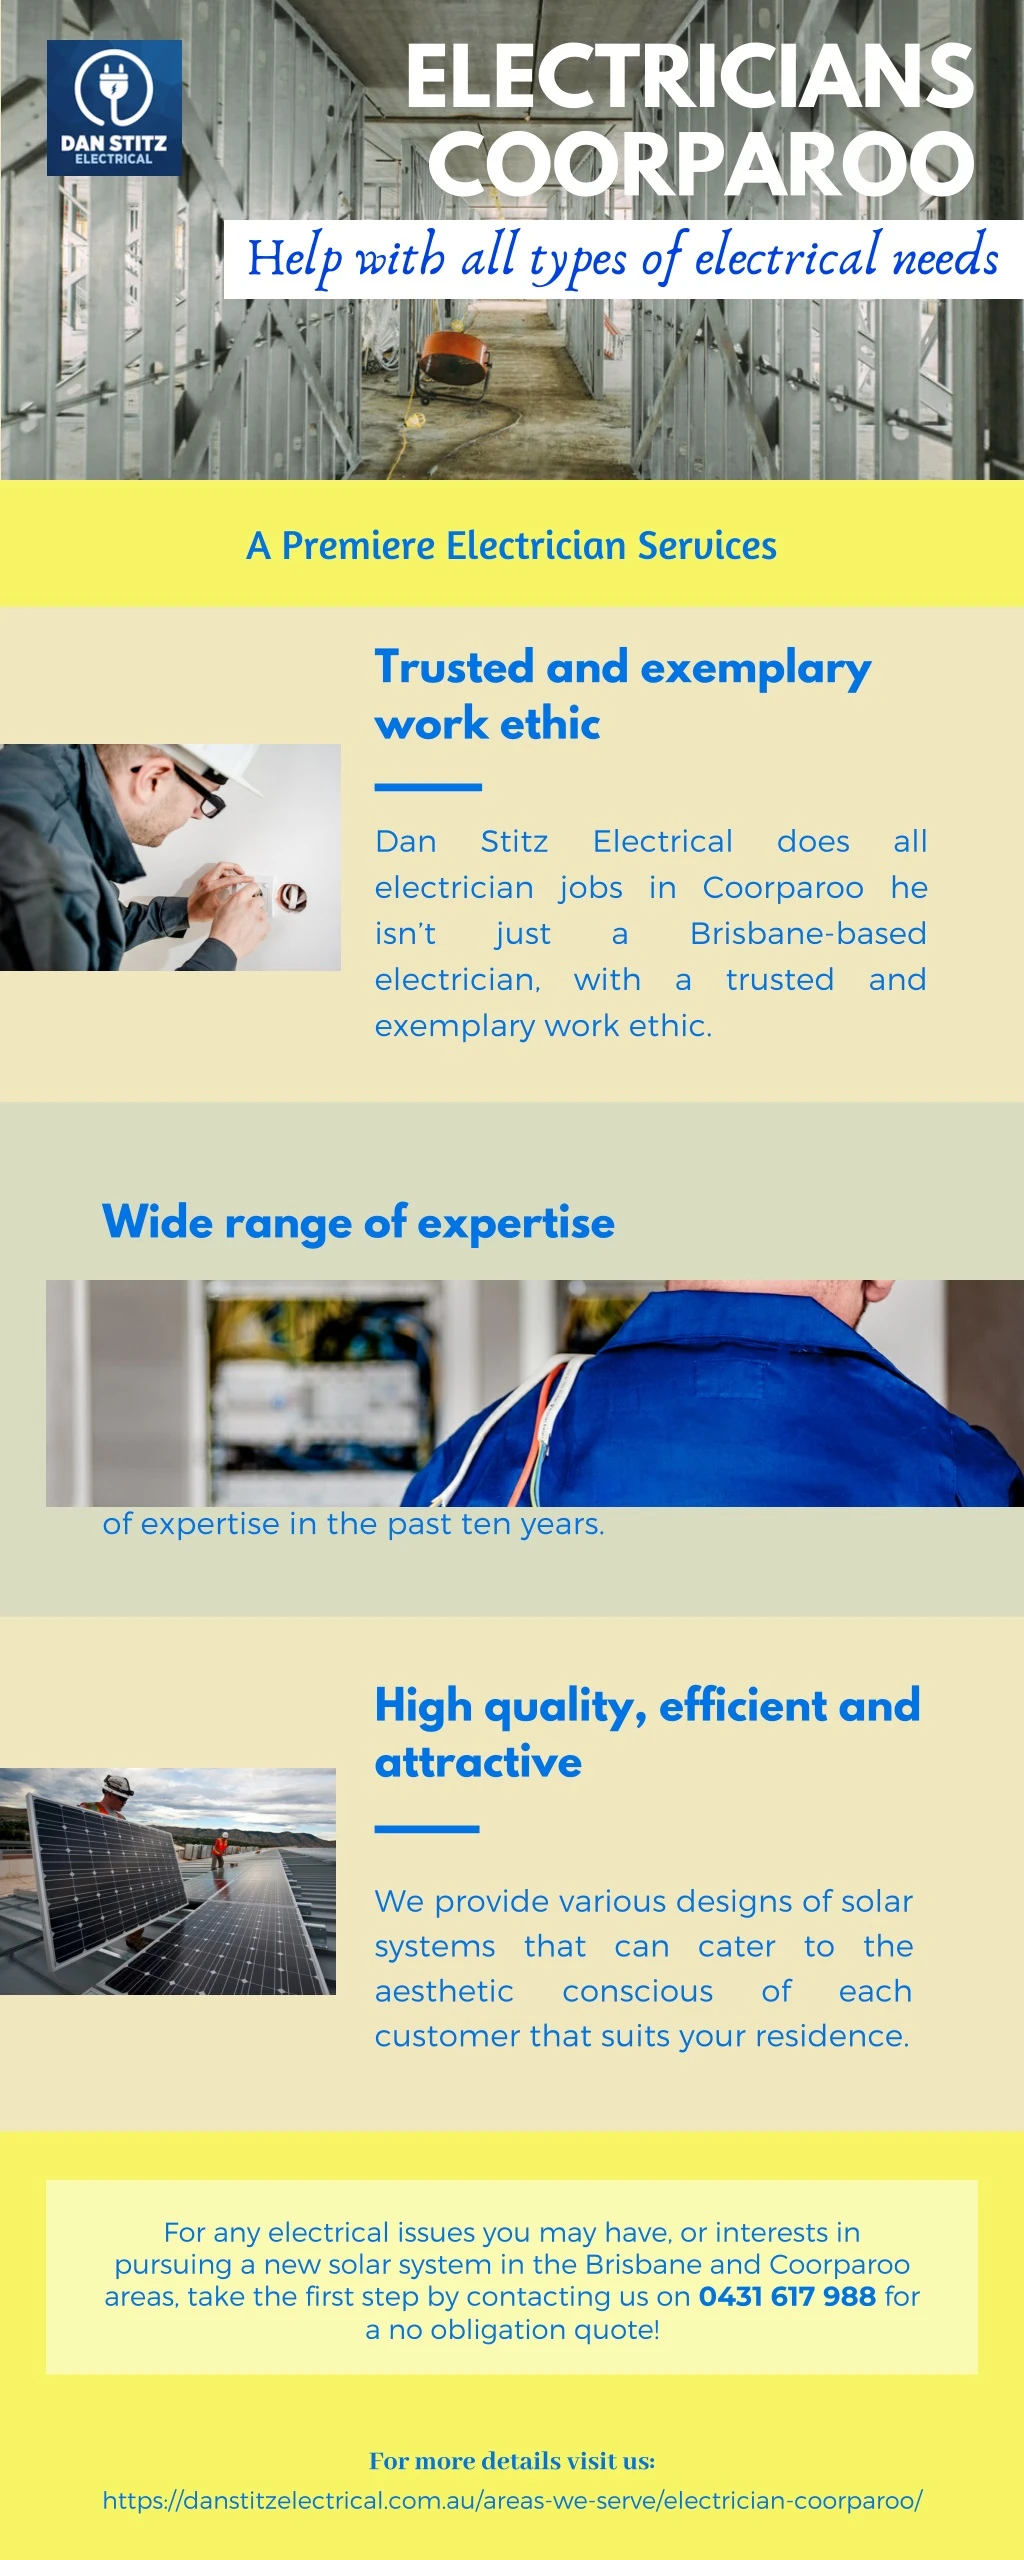 electricians coorparoo help with all types